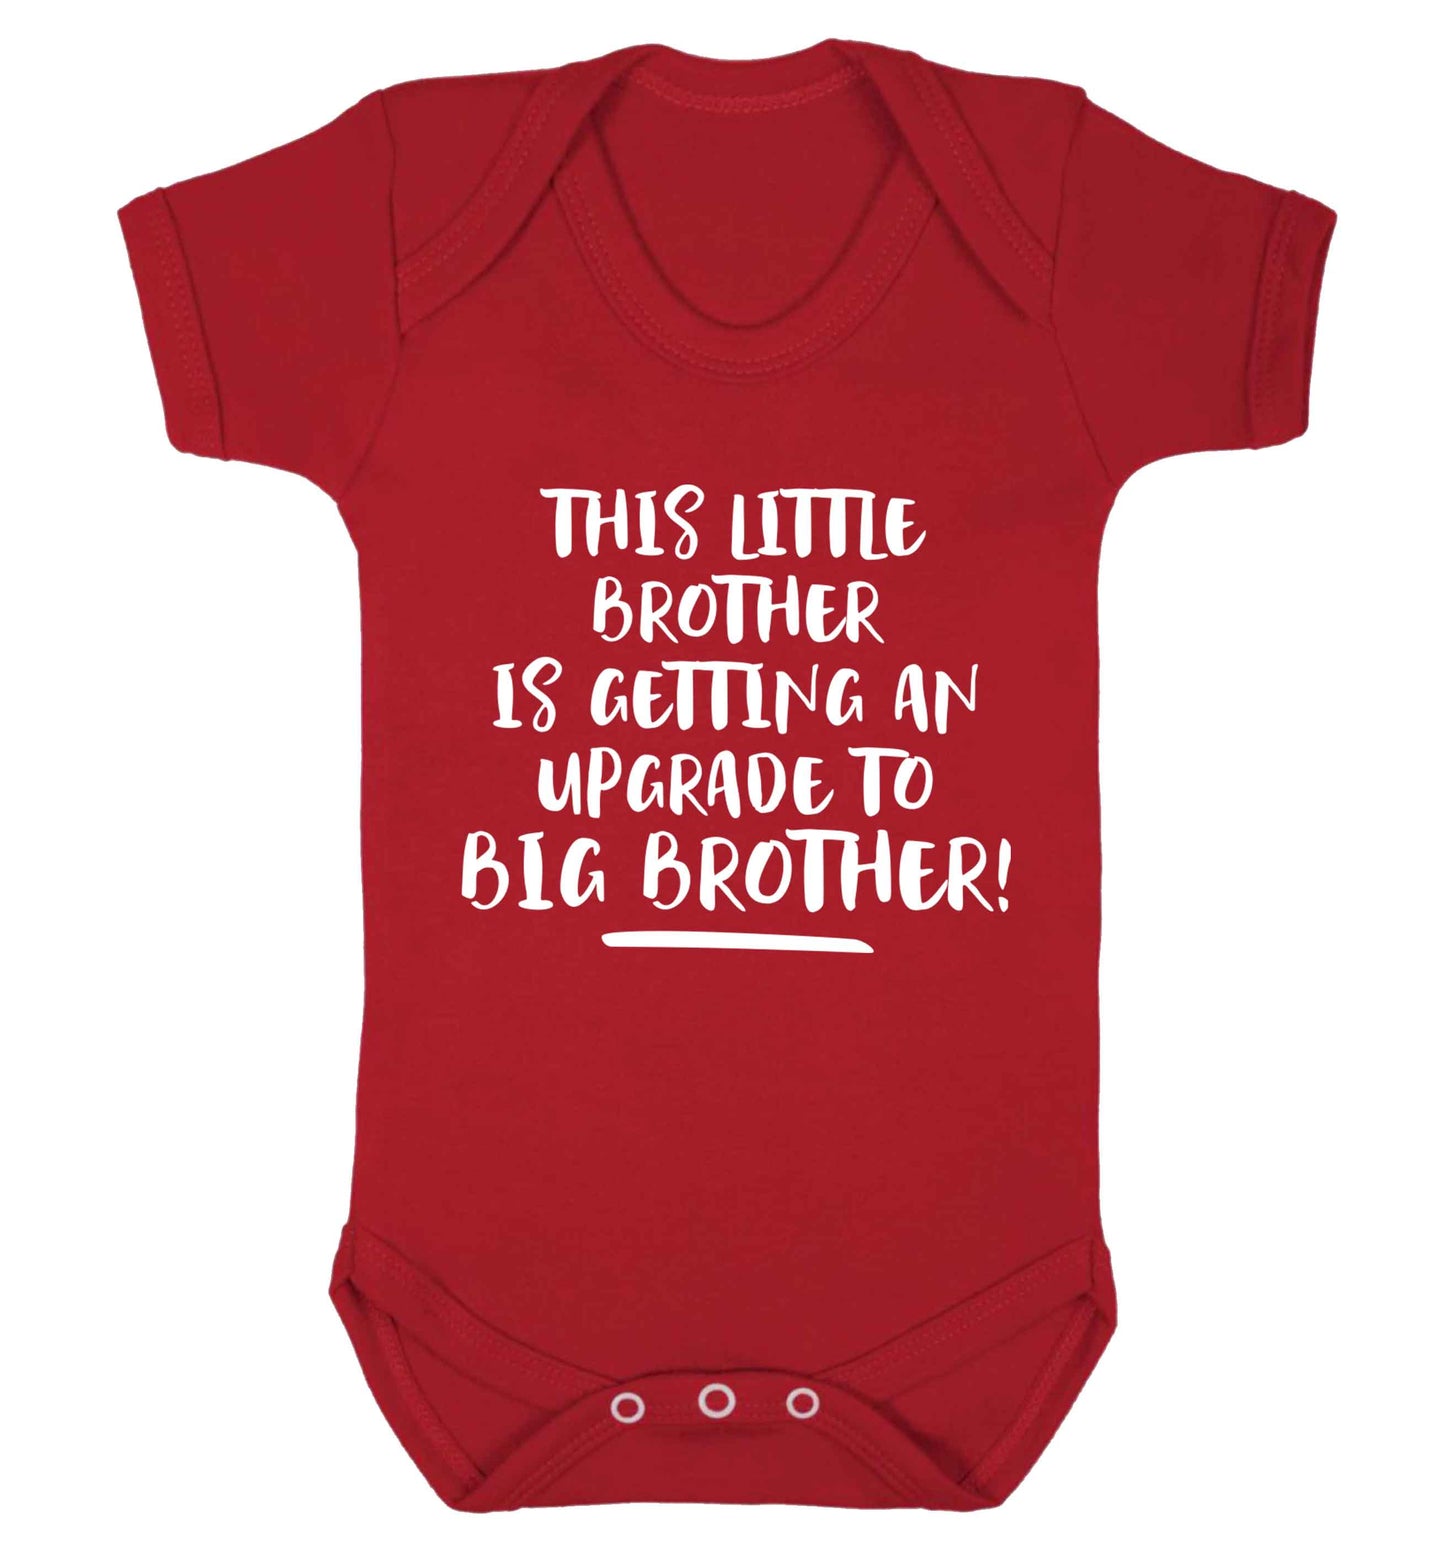 This little brother is getting an upgrade to big brother! Baby Vest red 18-24 months